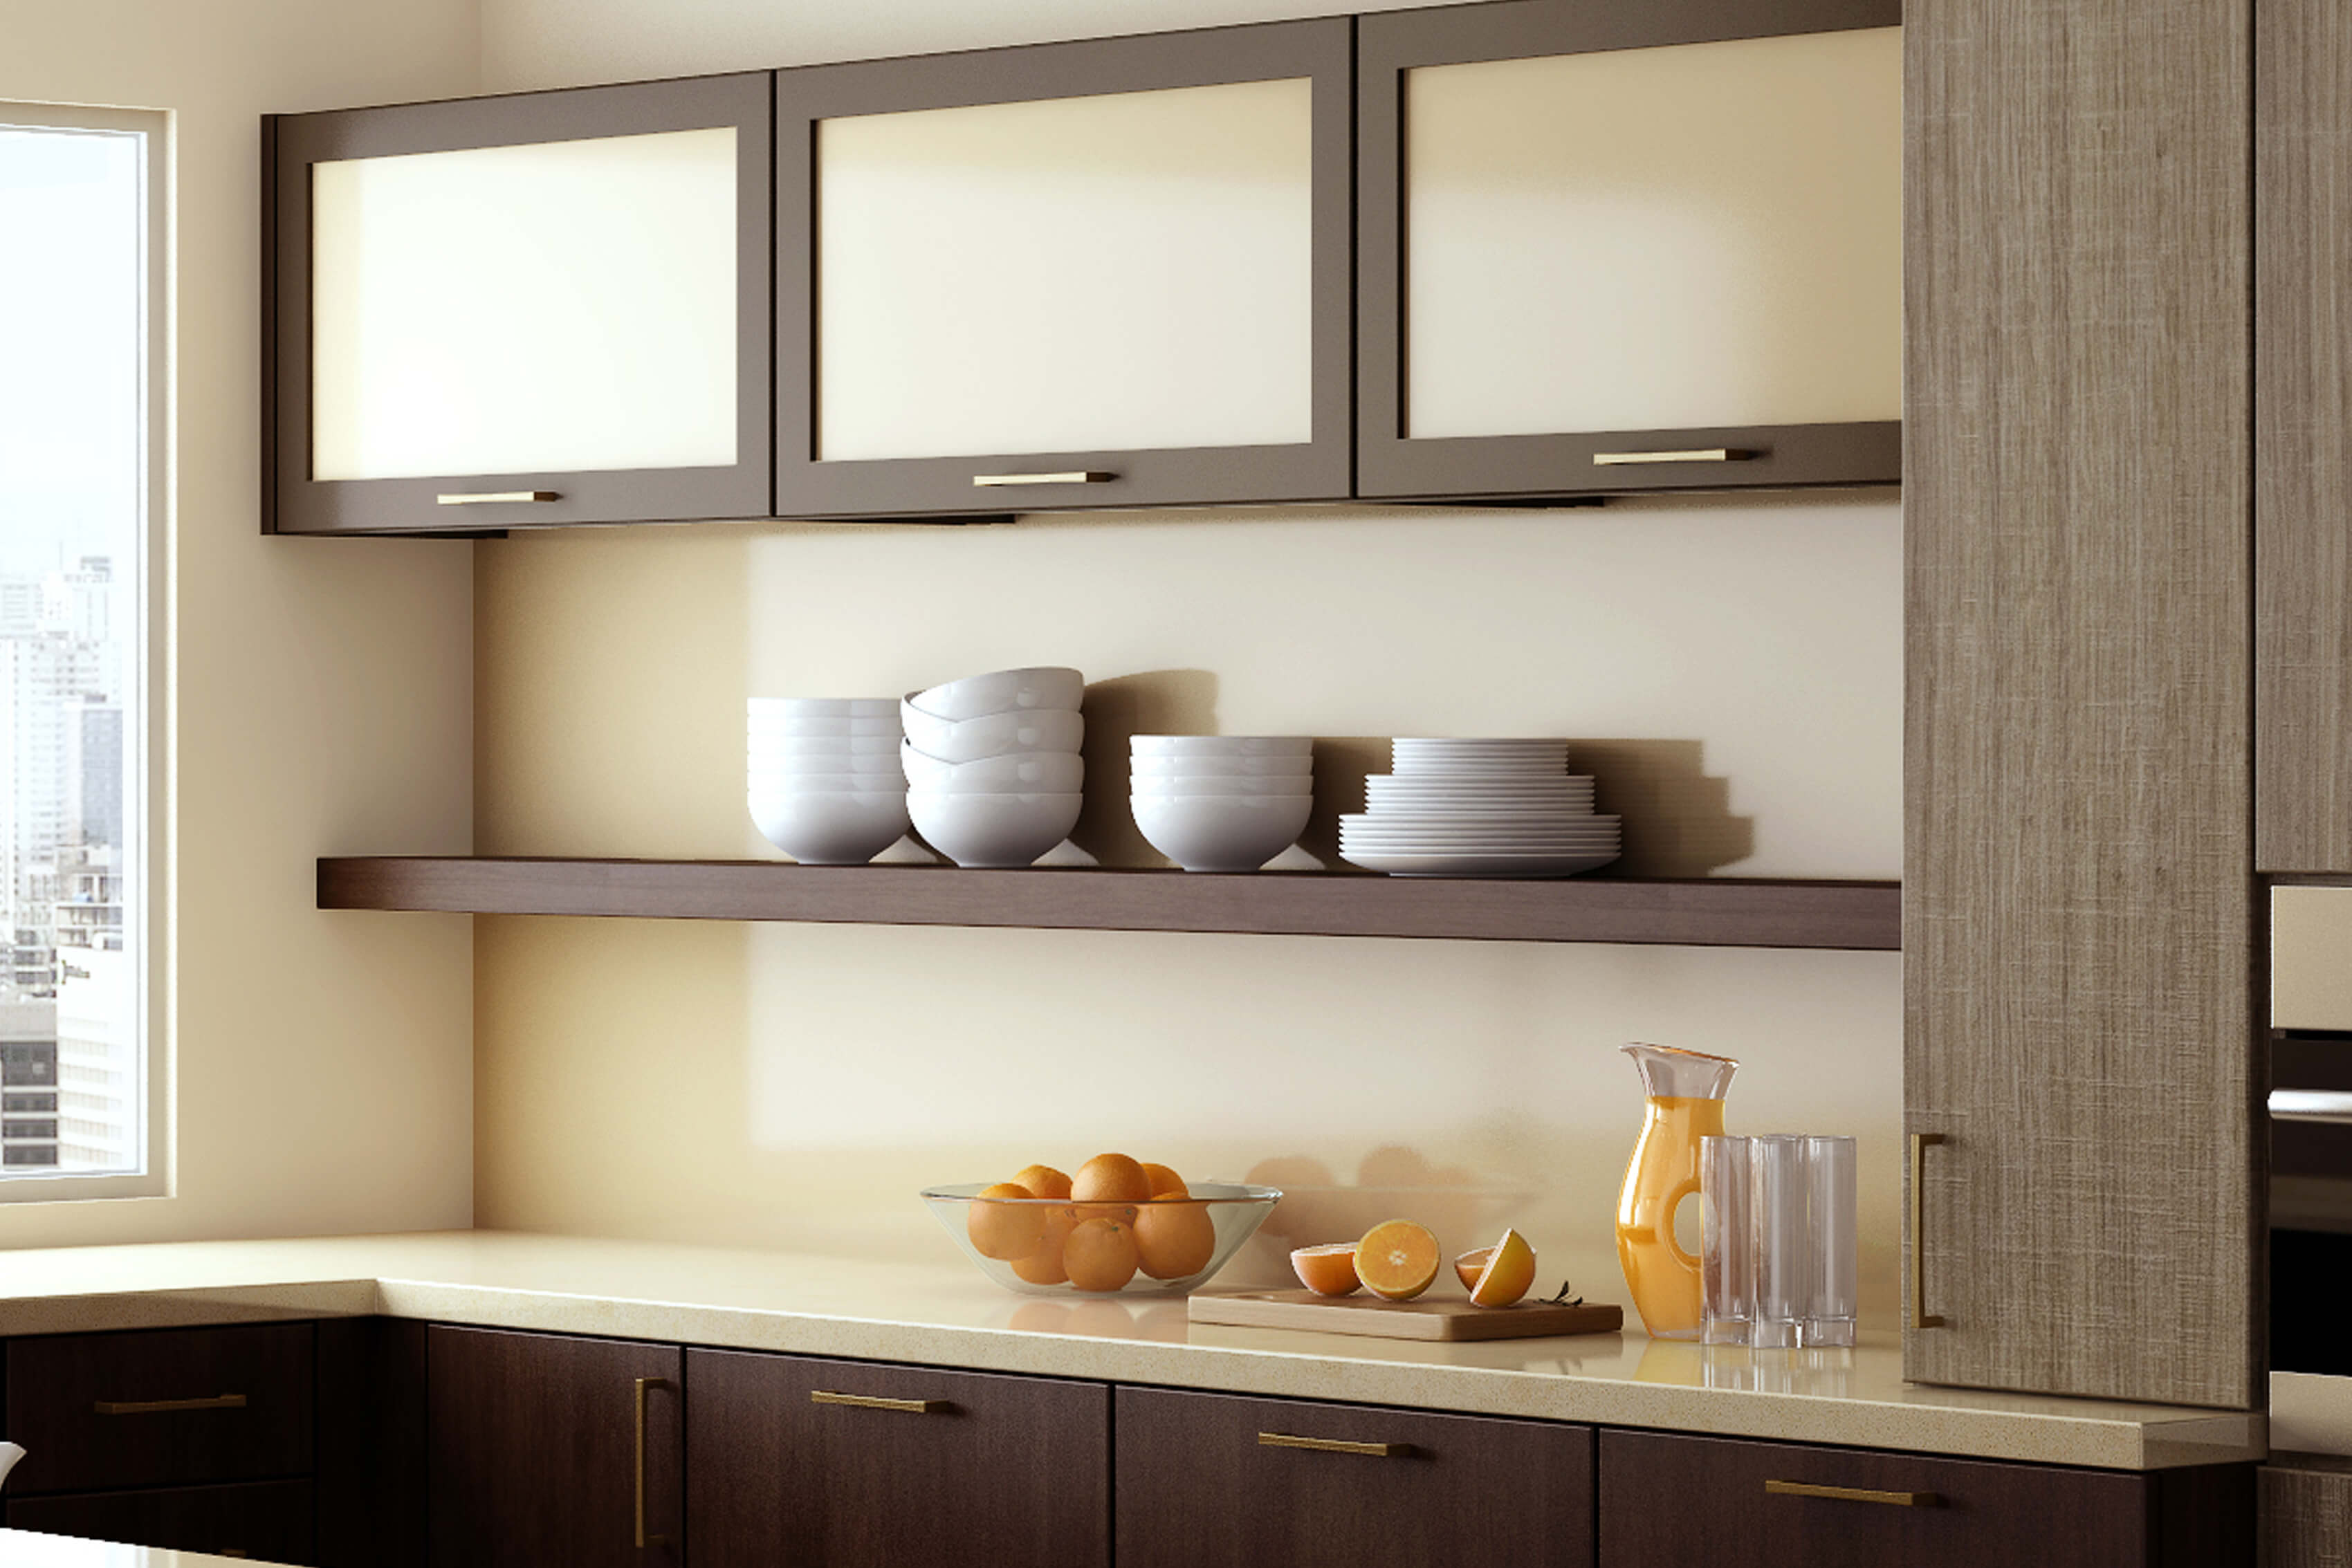 This luxurious, lofty kitchen features glimmery hints of brushed brass with horizontal wall cabinet doors with satin glass doors. A long floating shelf below the line of wall cabinets creates a beautiful and accessible place for every day dishware.